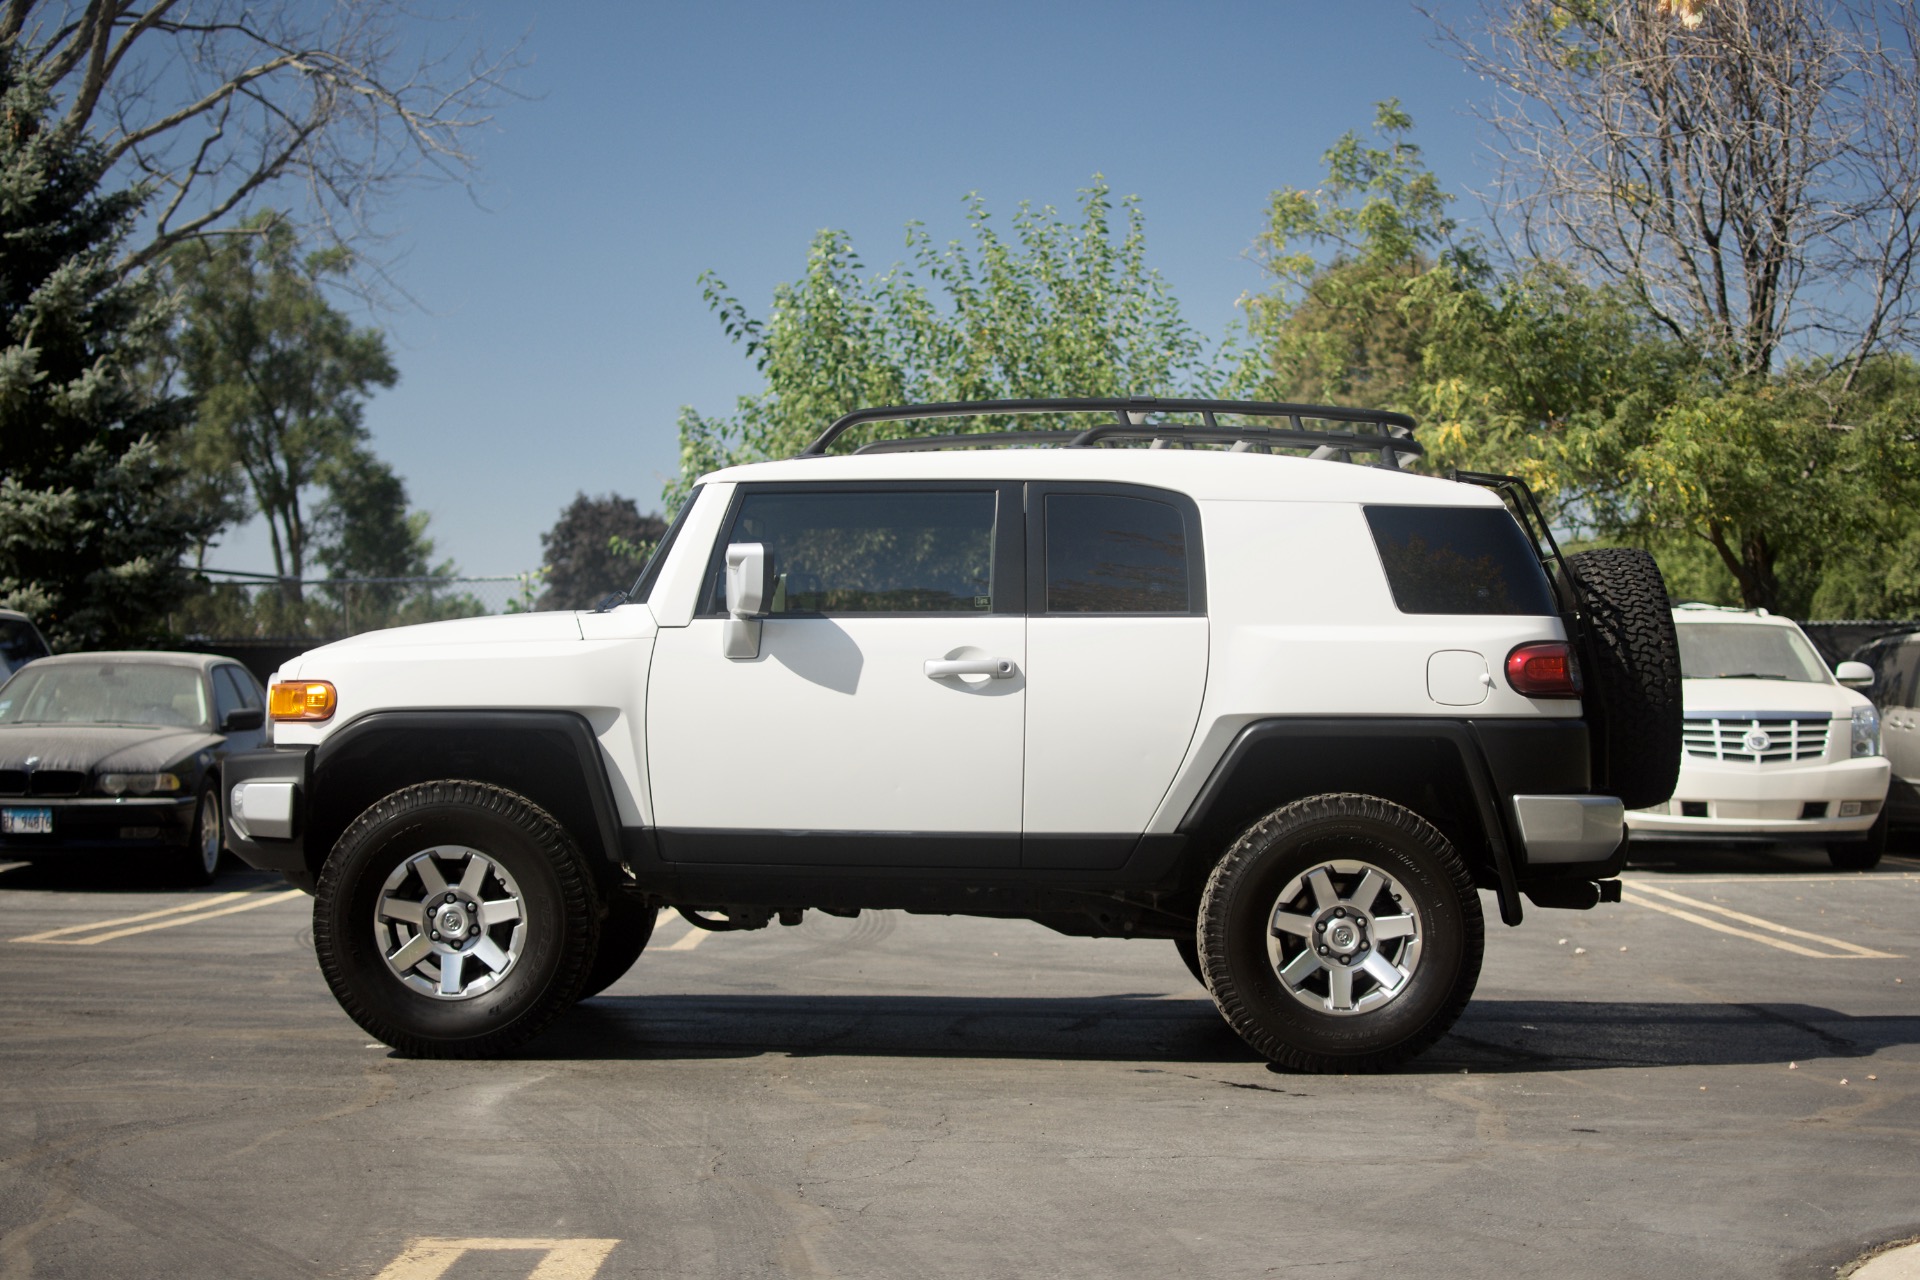 Used-2014-Toyota-FJ-Cruiser-SUV-6-Speed-Manual-Only-30k-Miles-Perfect-Condition-UPGRADES